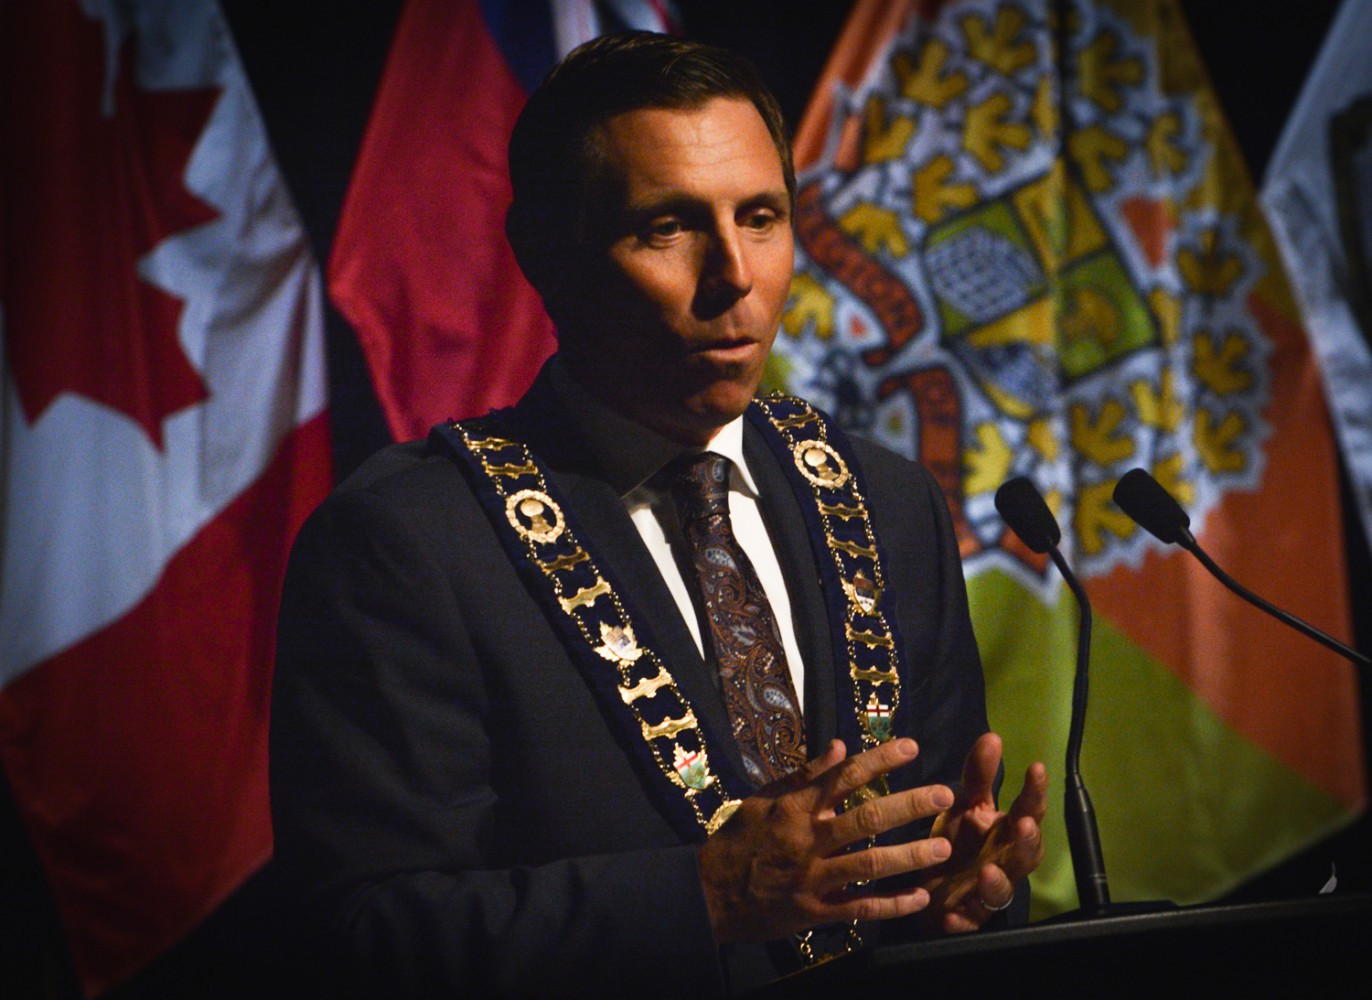 Patrick Brown’s murky budget once again fails Brampton taxpayers; downtown redevelopment, university, LRT, cricket stadium among missing items